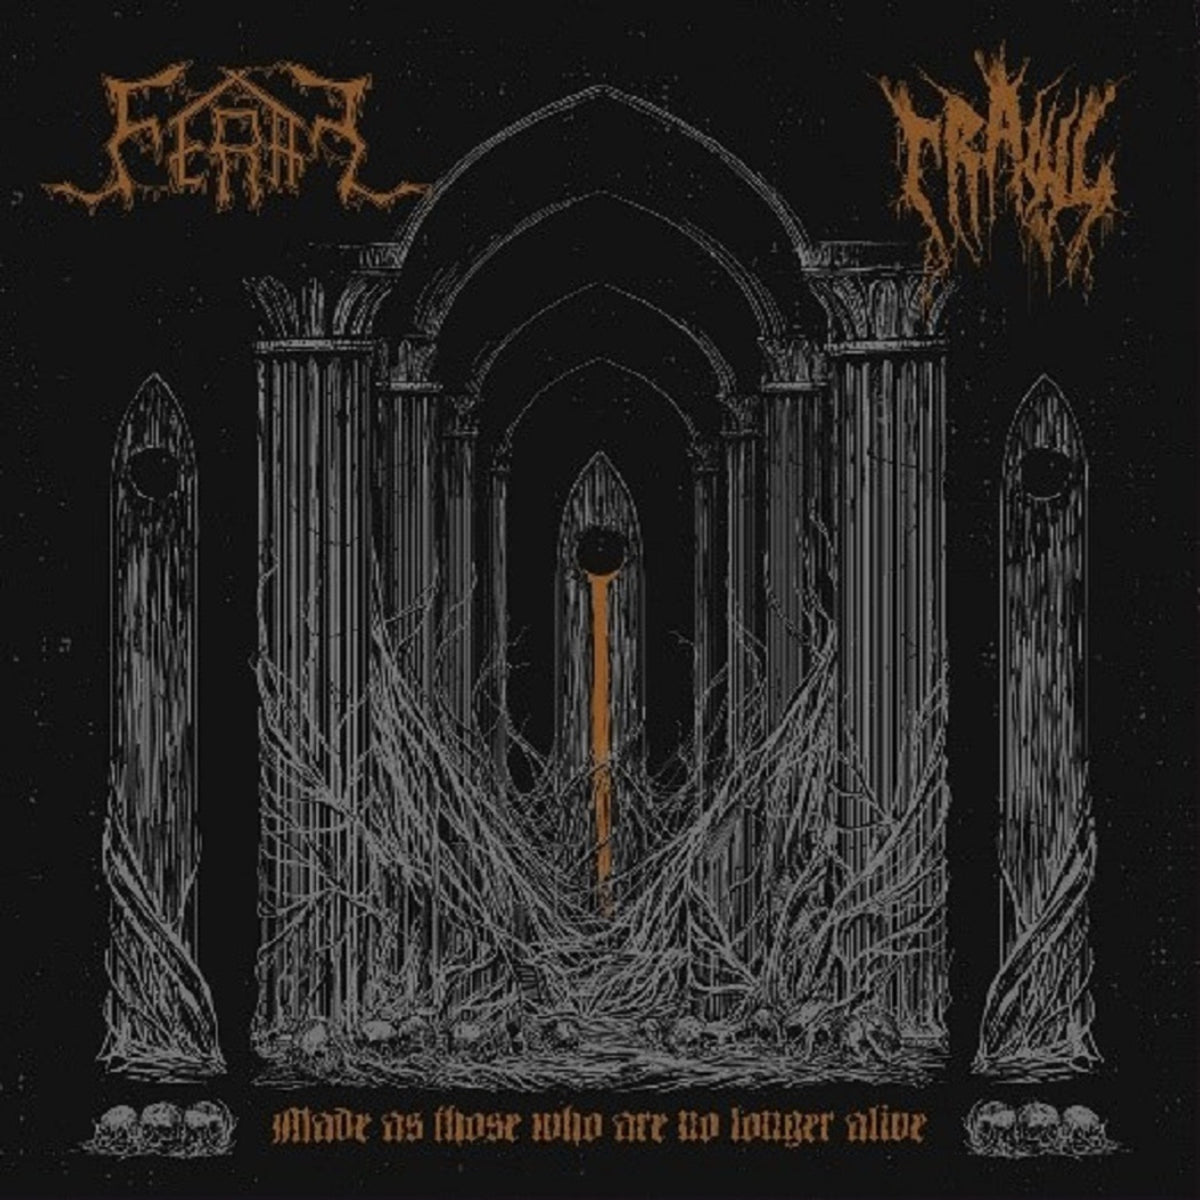 Feral / Crawl - Made As Those Who Are No Longer Alive